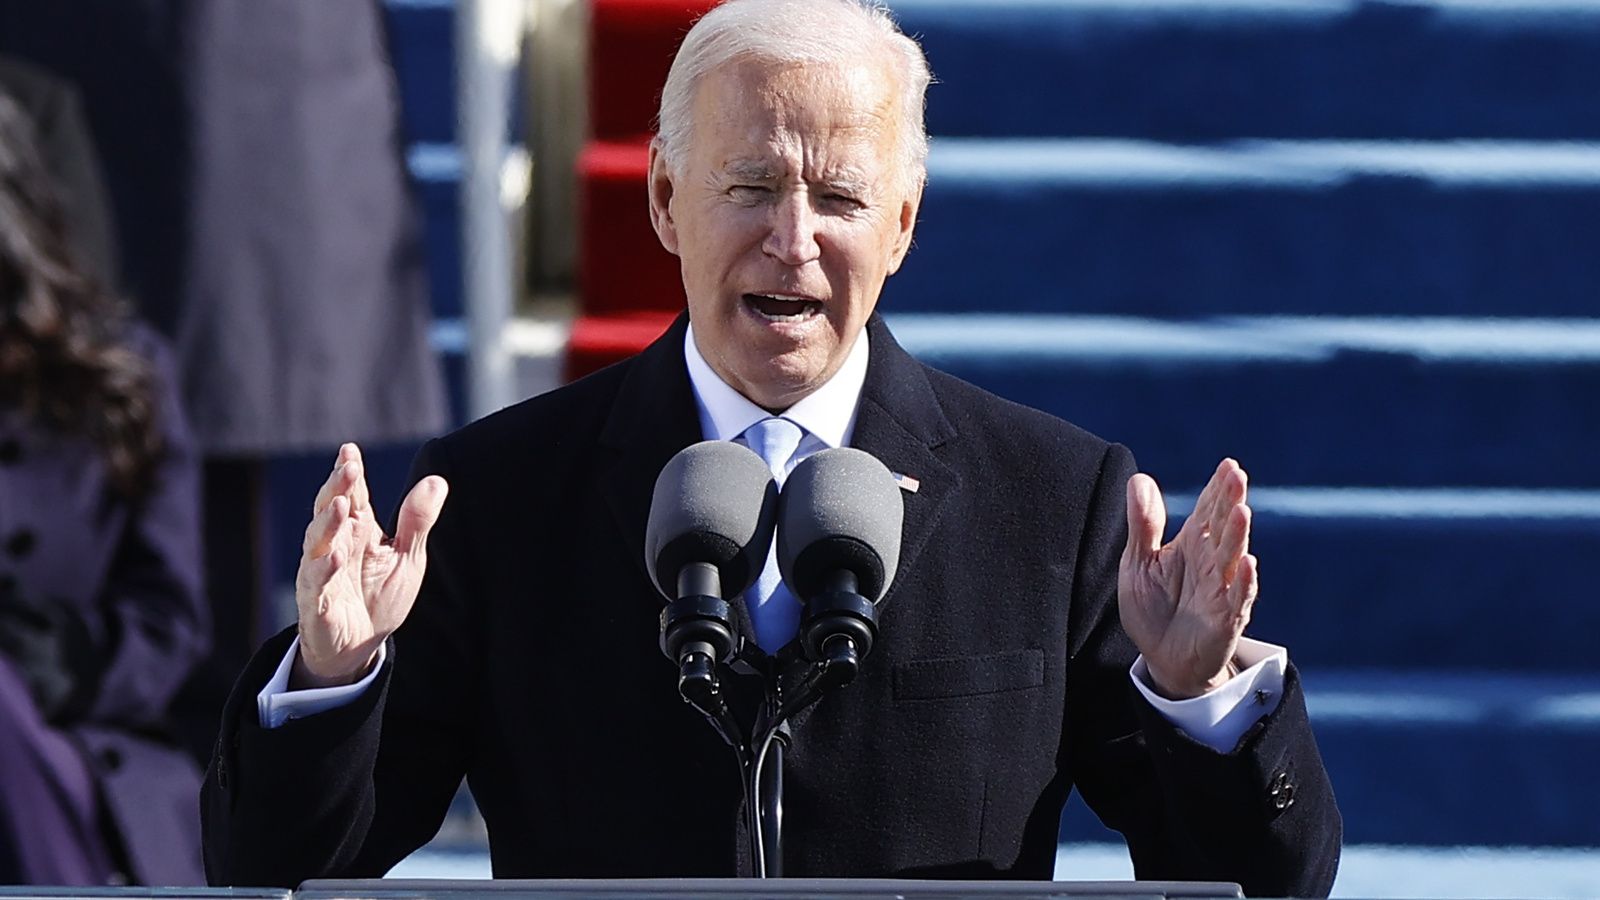 Biden's Inaugural Address to a Divided America. Council on Foreign Relations